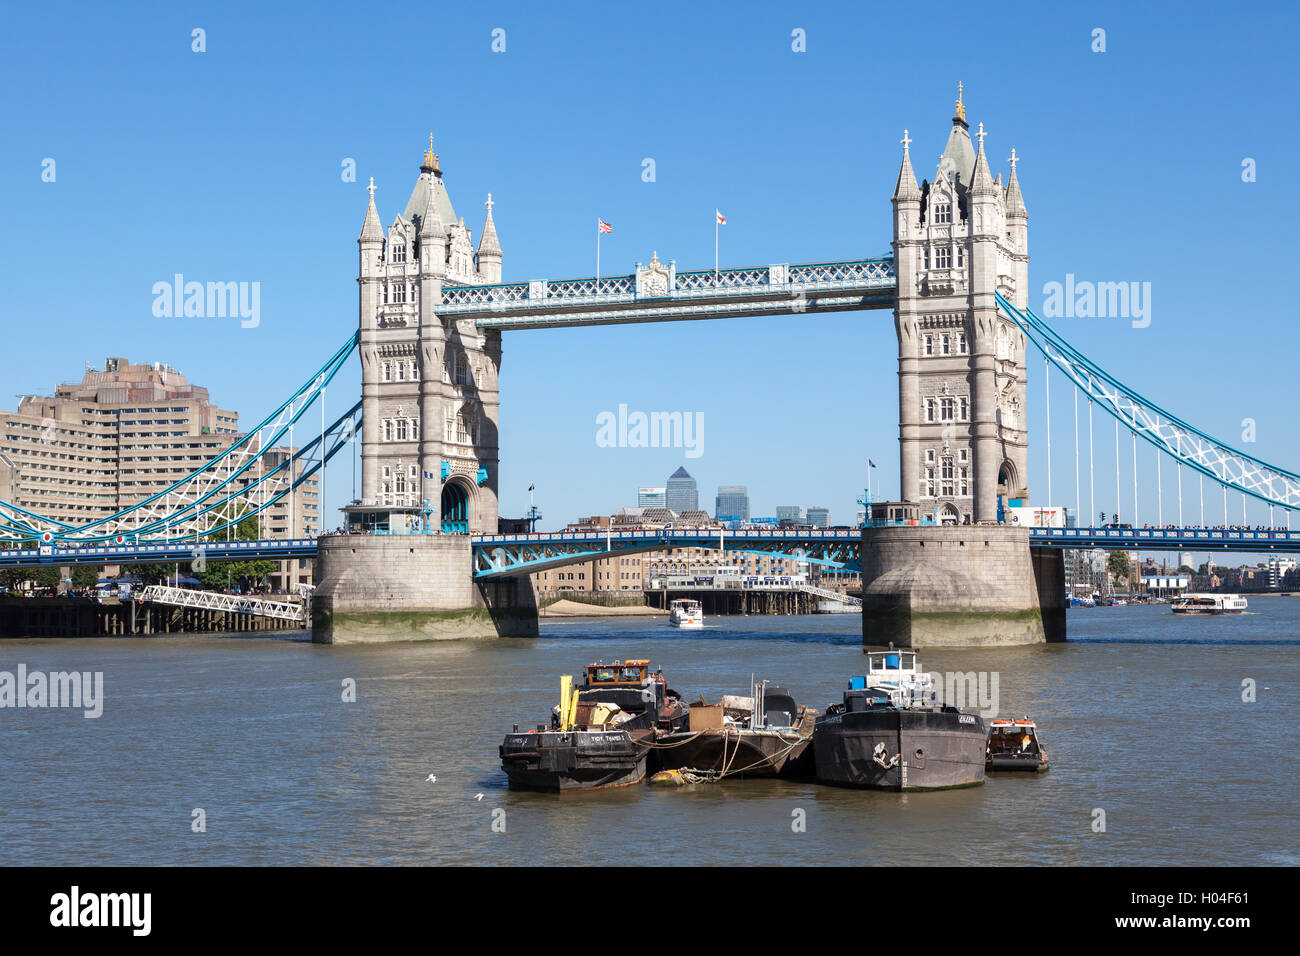 View of the famous Tower Bridge on a sunny day in London, UK. Stock Photo